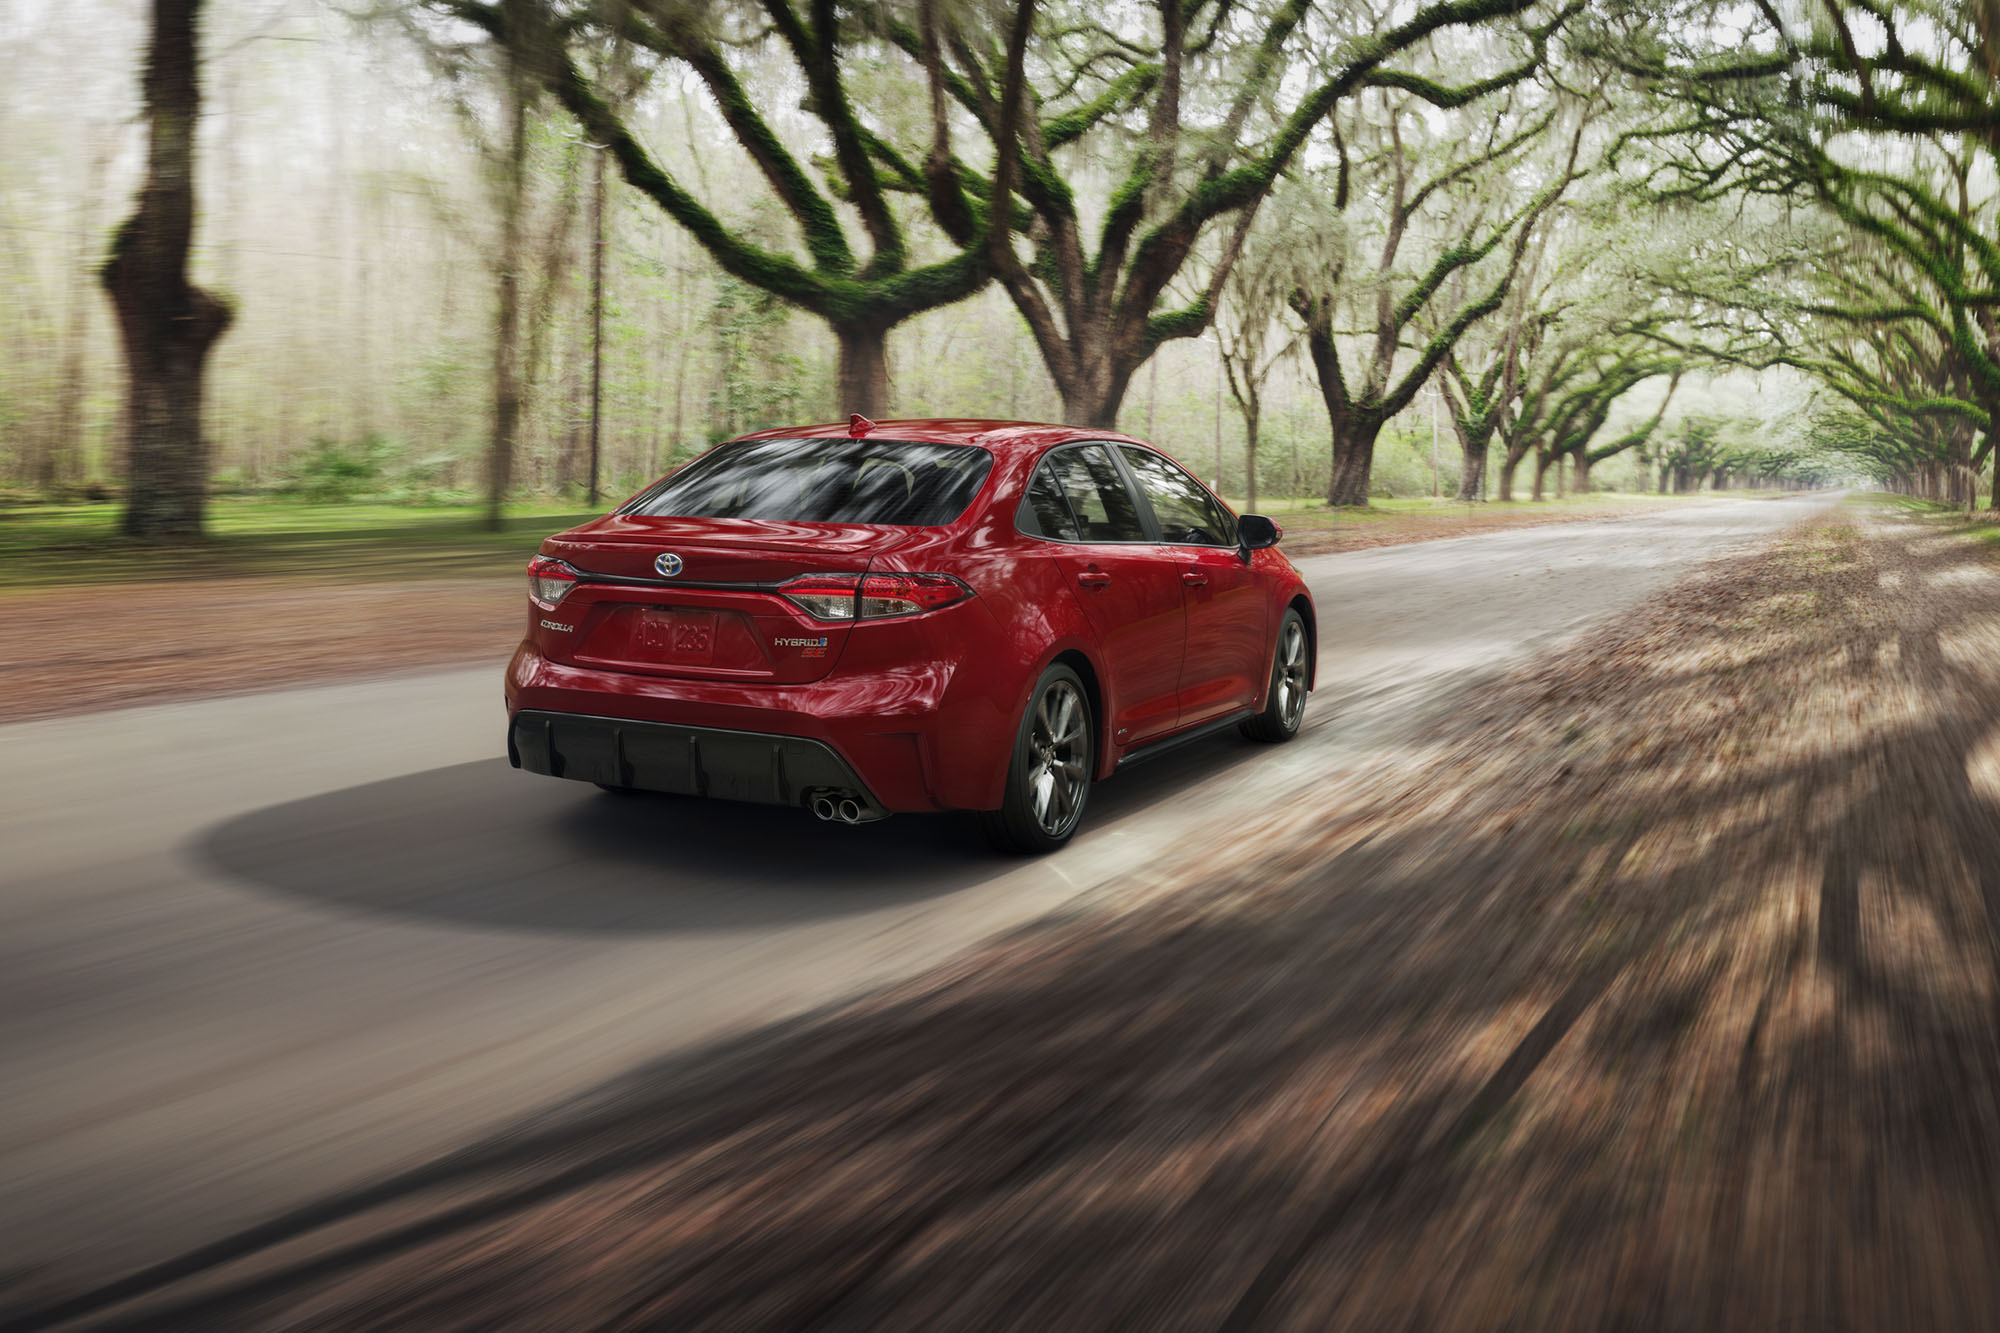 2023 Toyota Corolla in red driving along a tree-lined road